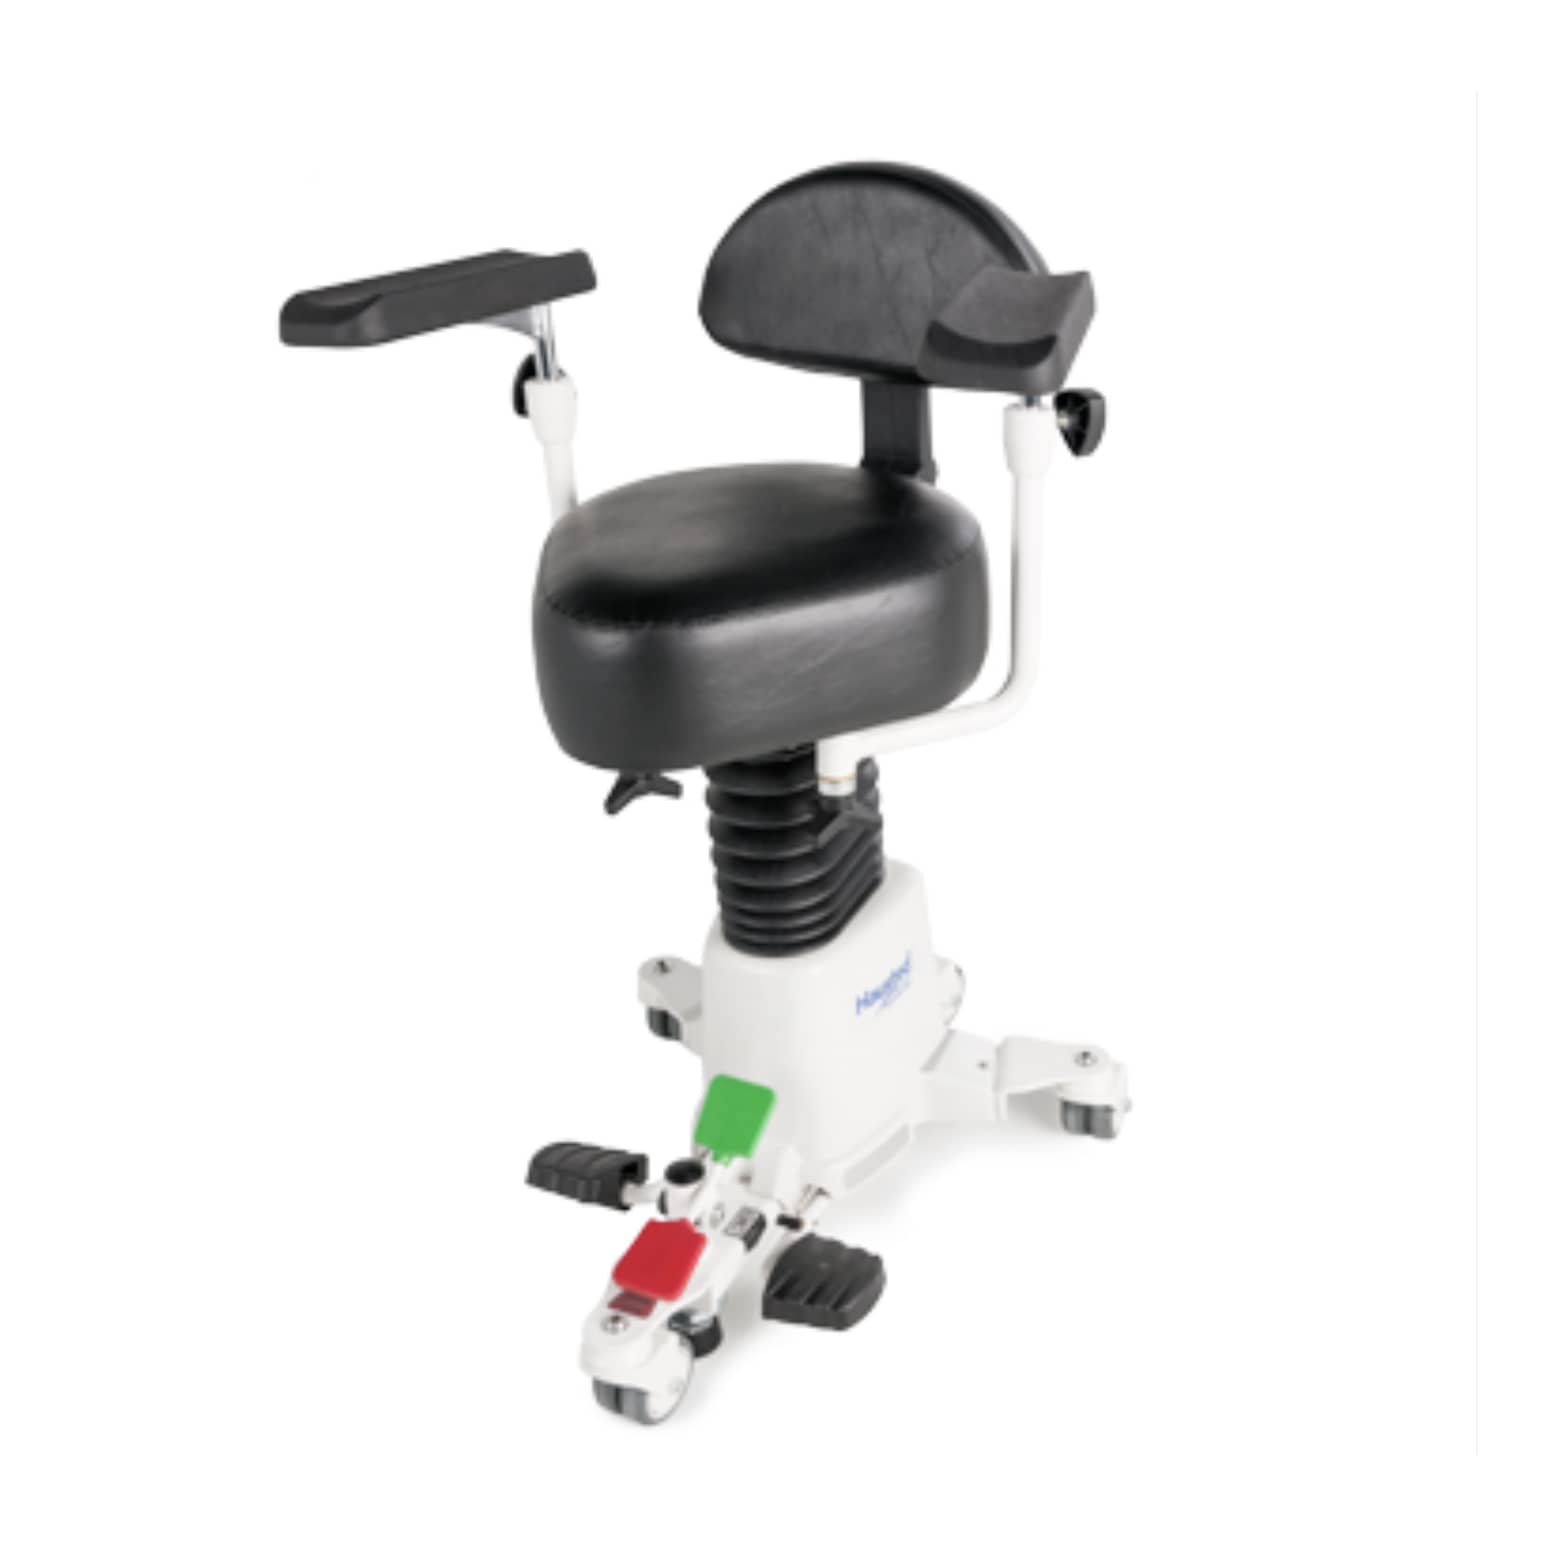 Hausted HSS Series Surgical Stool - Water Drop Seat Style